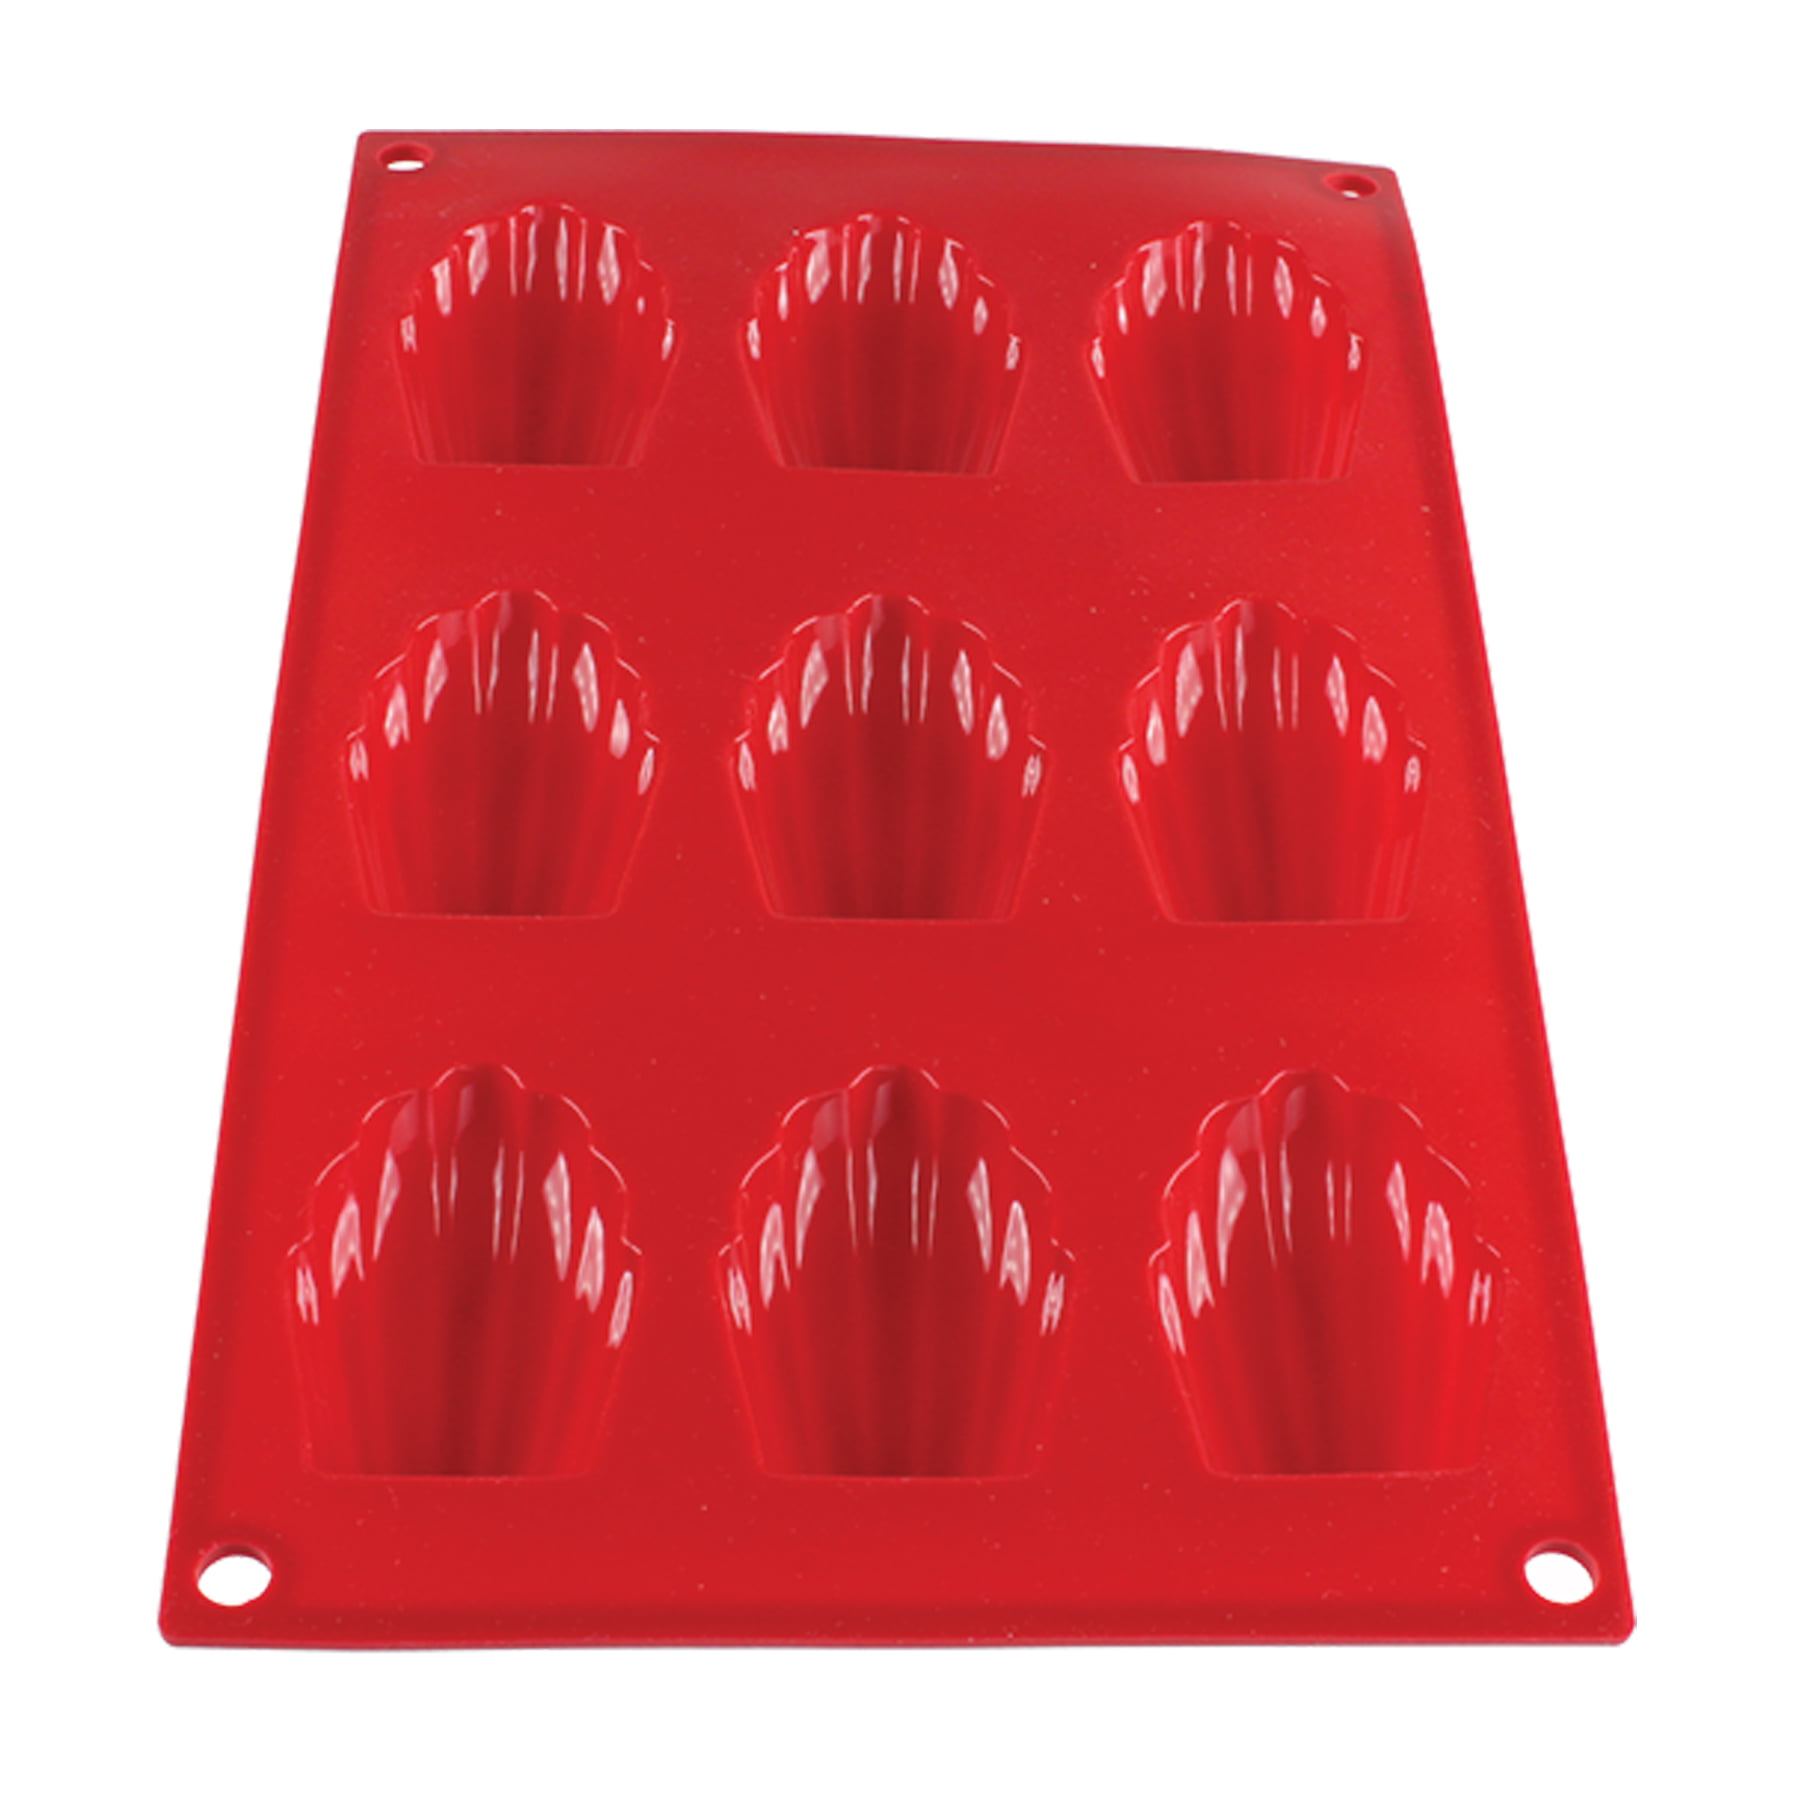 Lekue Silicone 6 Cavity Muffin Baking Mold, Red : Target